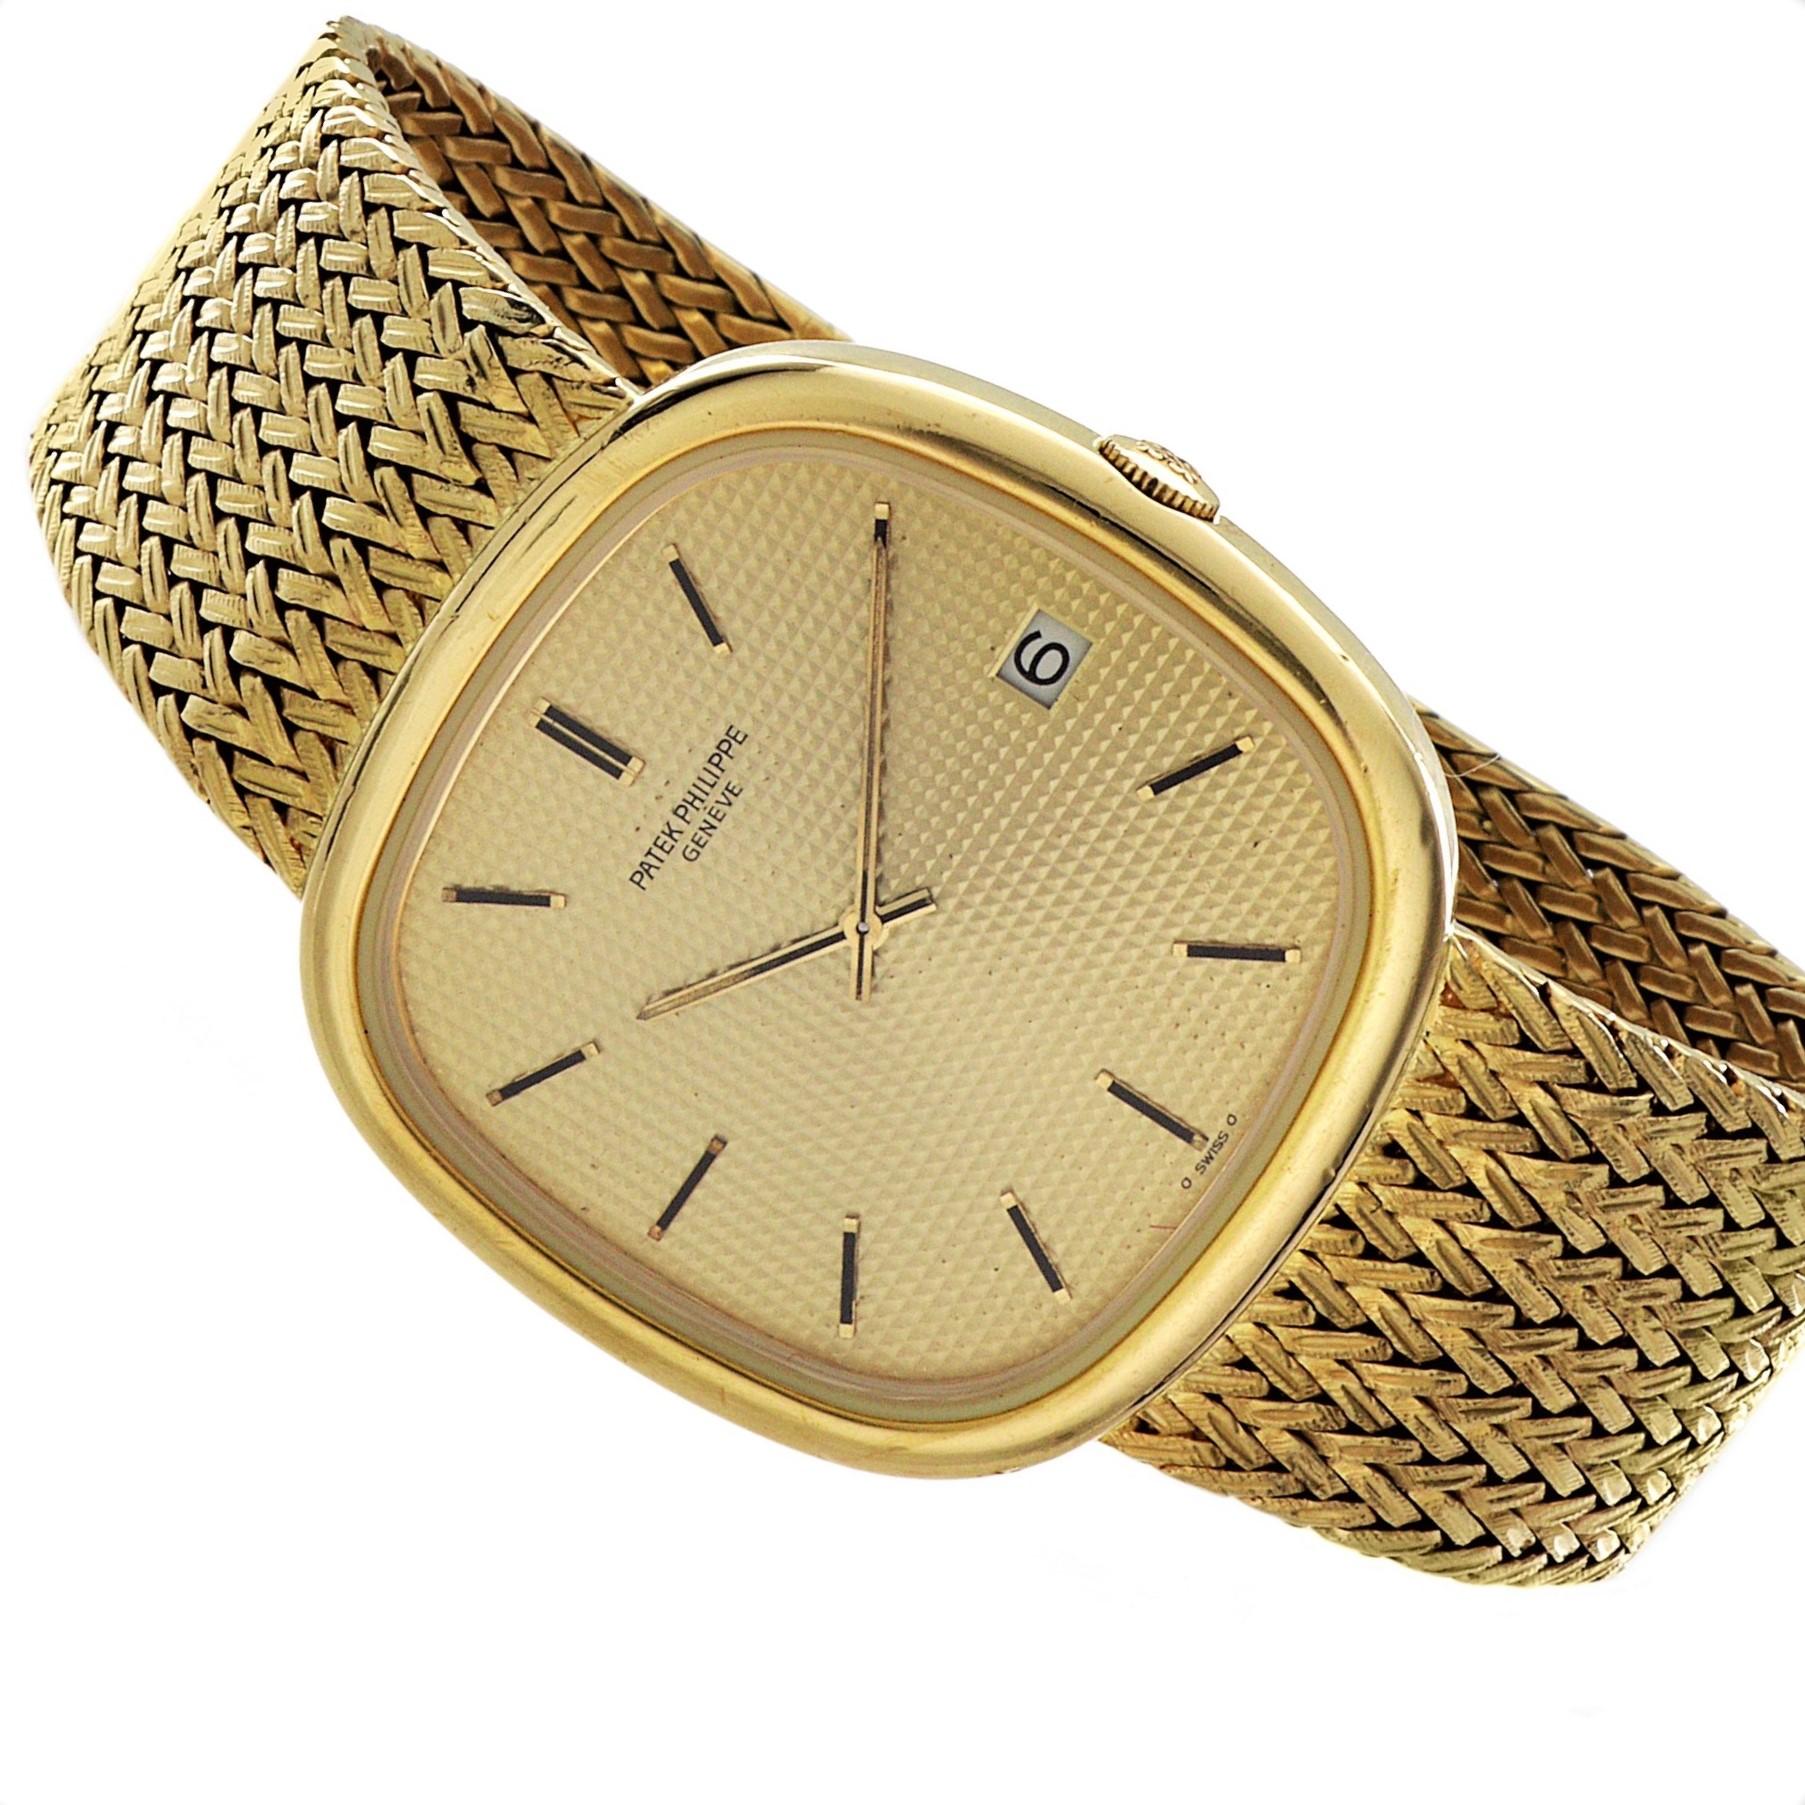 Patek Philippe 3604/2 Cushion Shape Automatic Gold Bracelet Watch, 1977 In Excellent Condition For Sale In Santa Monica, CA